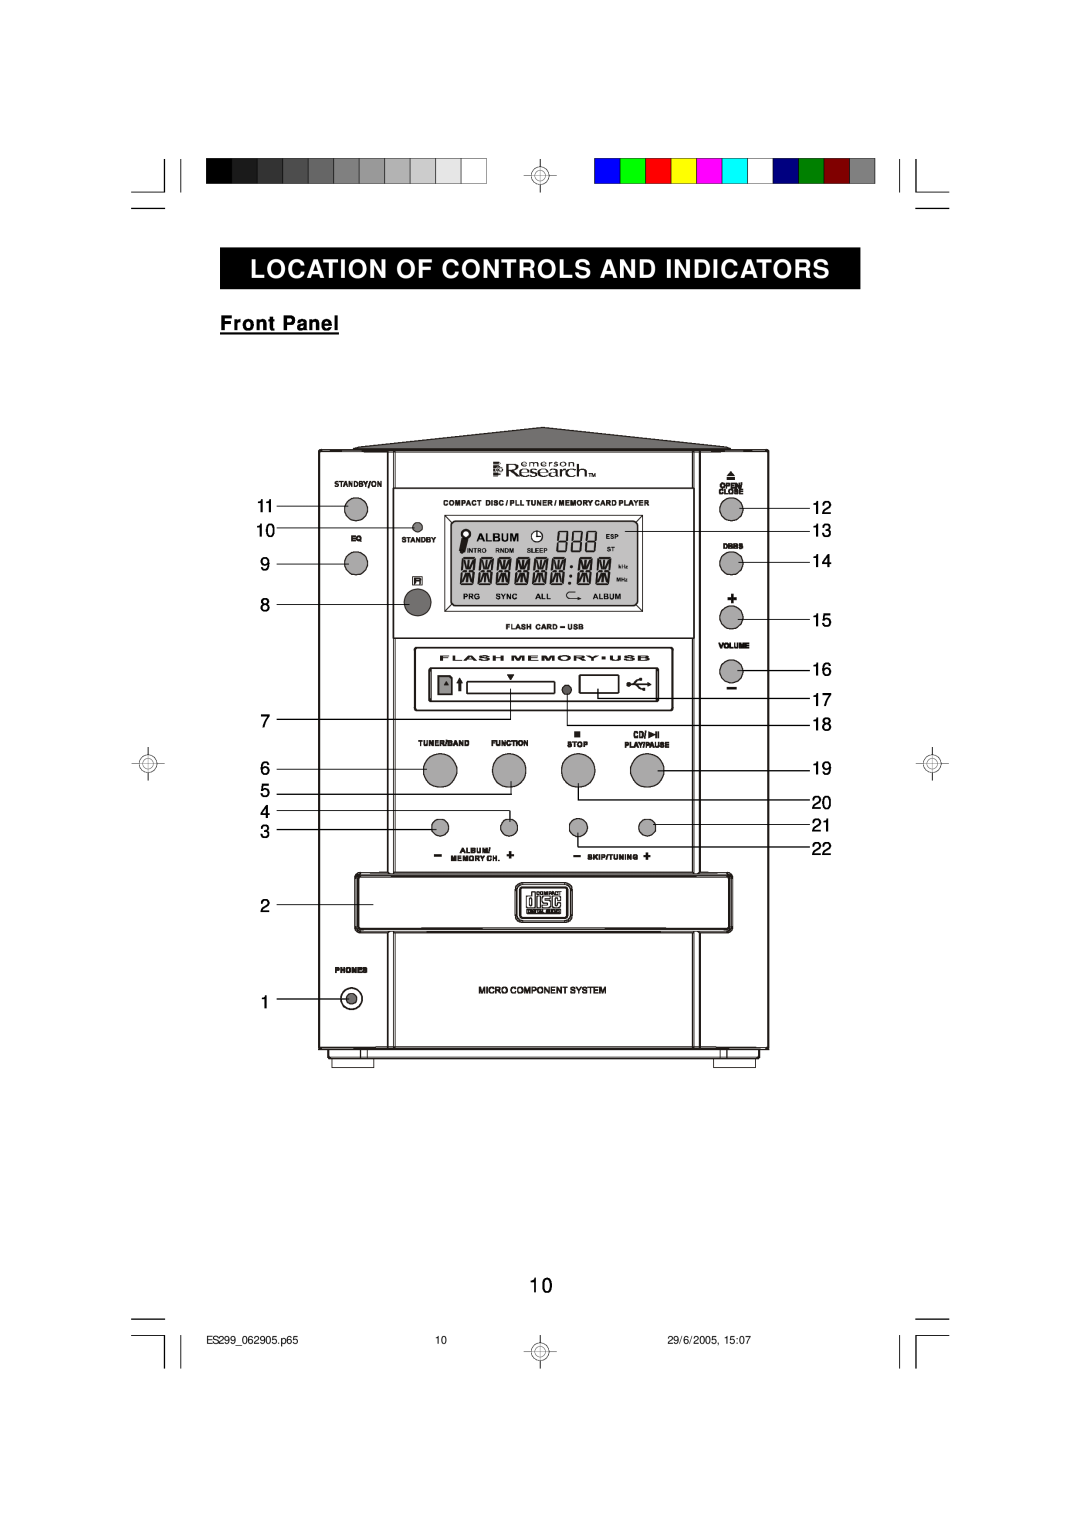 Emerson ES299 owner manual Location Of Controls And Indicators, Front Panel 